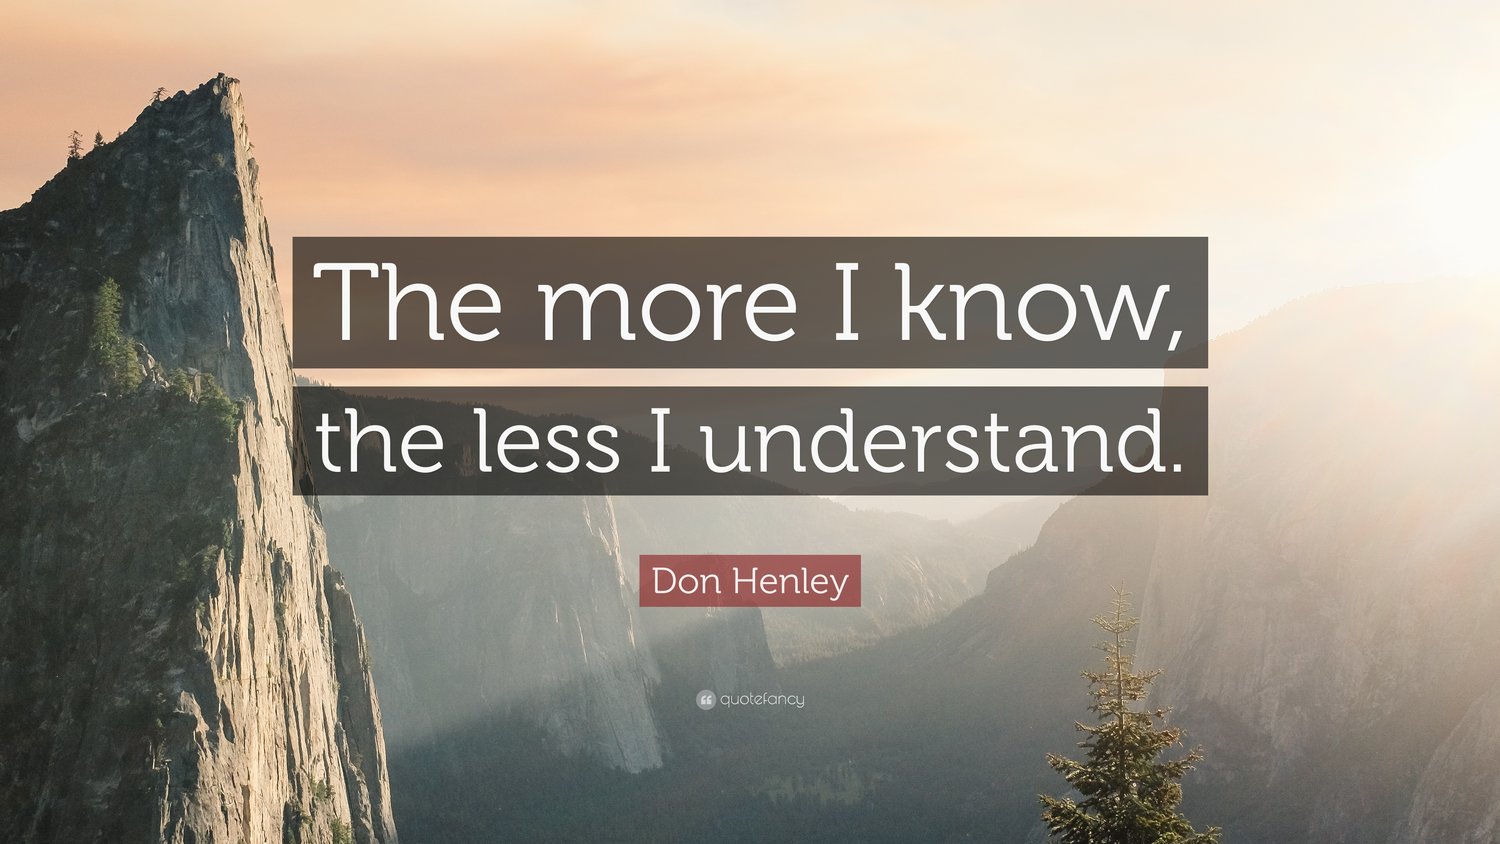 953384-Don-Henley-Quote-The-more-I-know-the-less-I-understand.jpg.